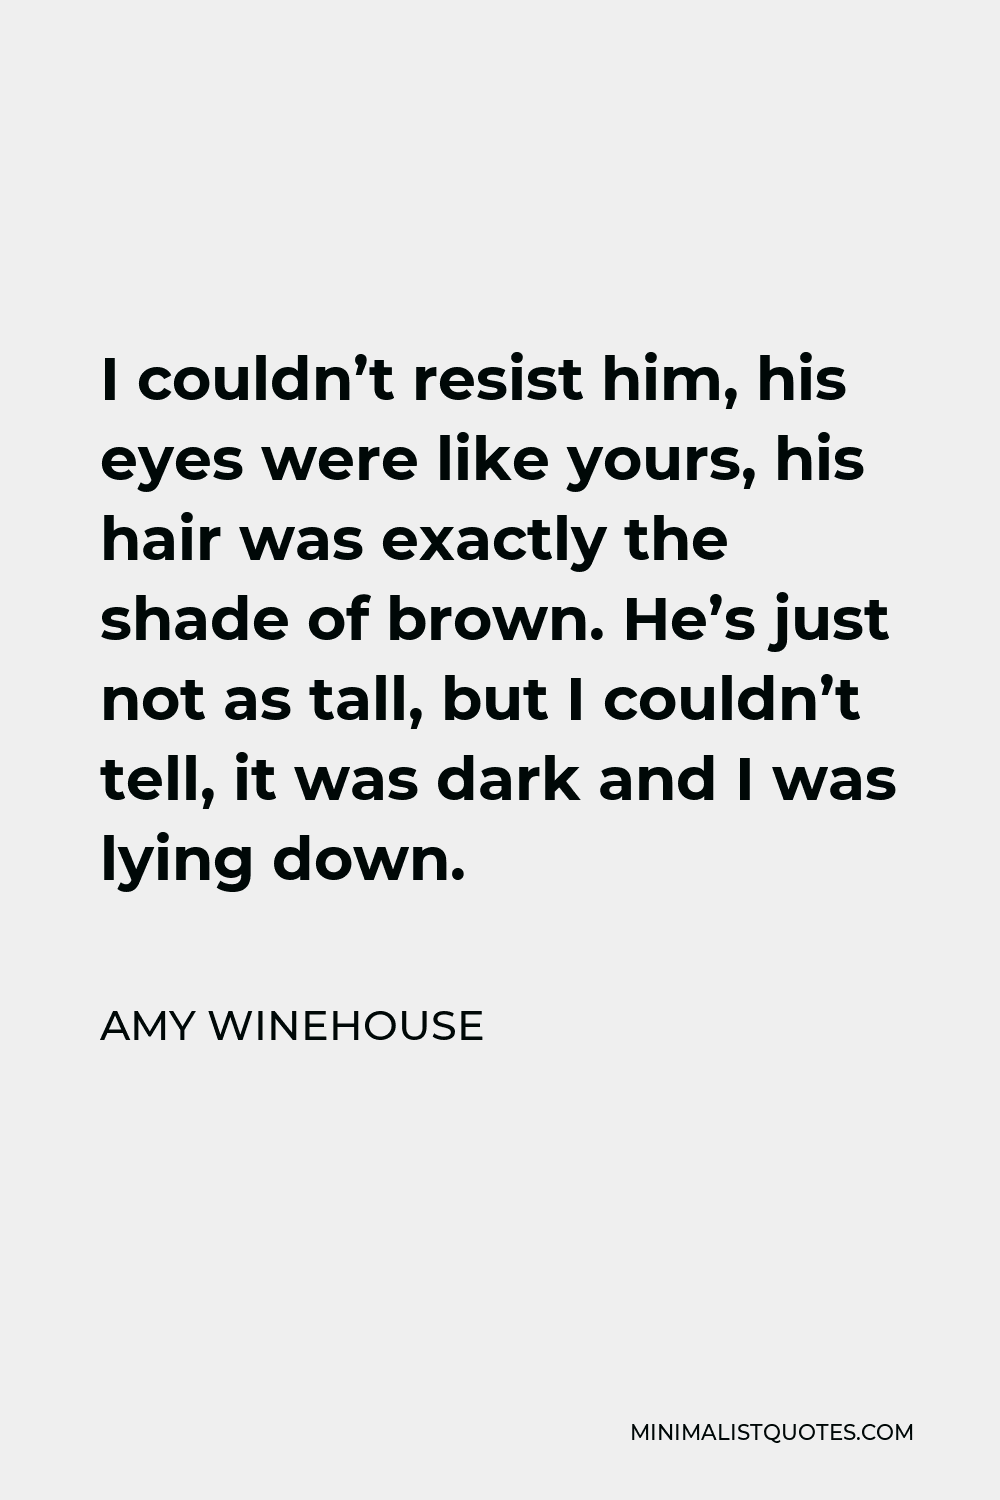 Amy Winehouse Quote - I couldn’t resist him, his eyes were like yours, his hair was exactly the shade of brown. He’s just not as tall, but I couldn’t tell, it was dark and I was lying down.